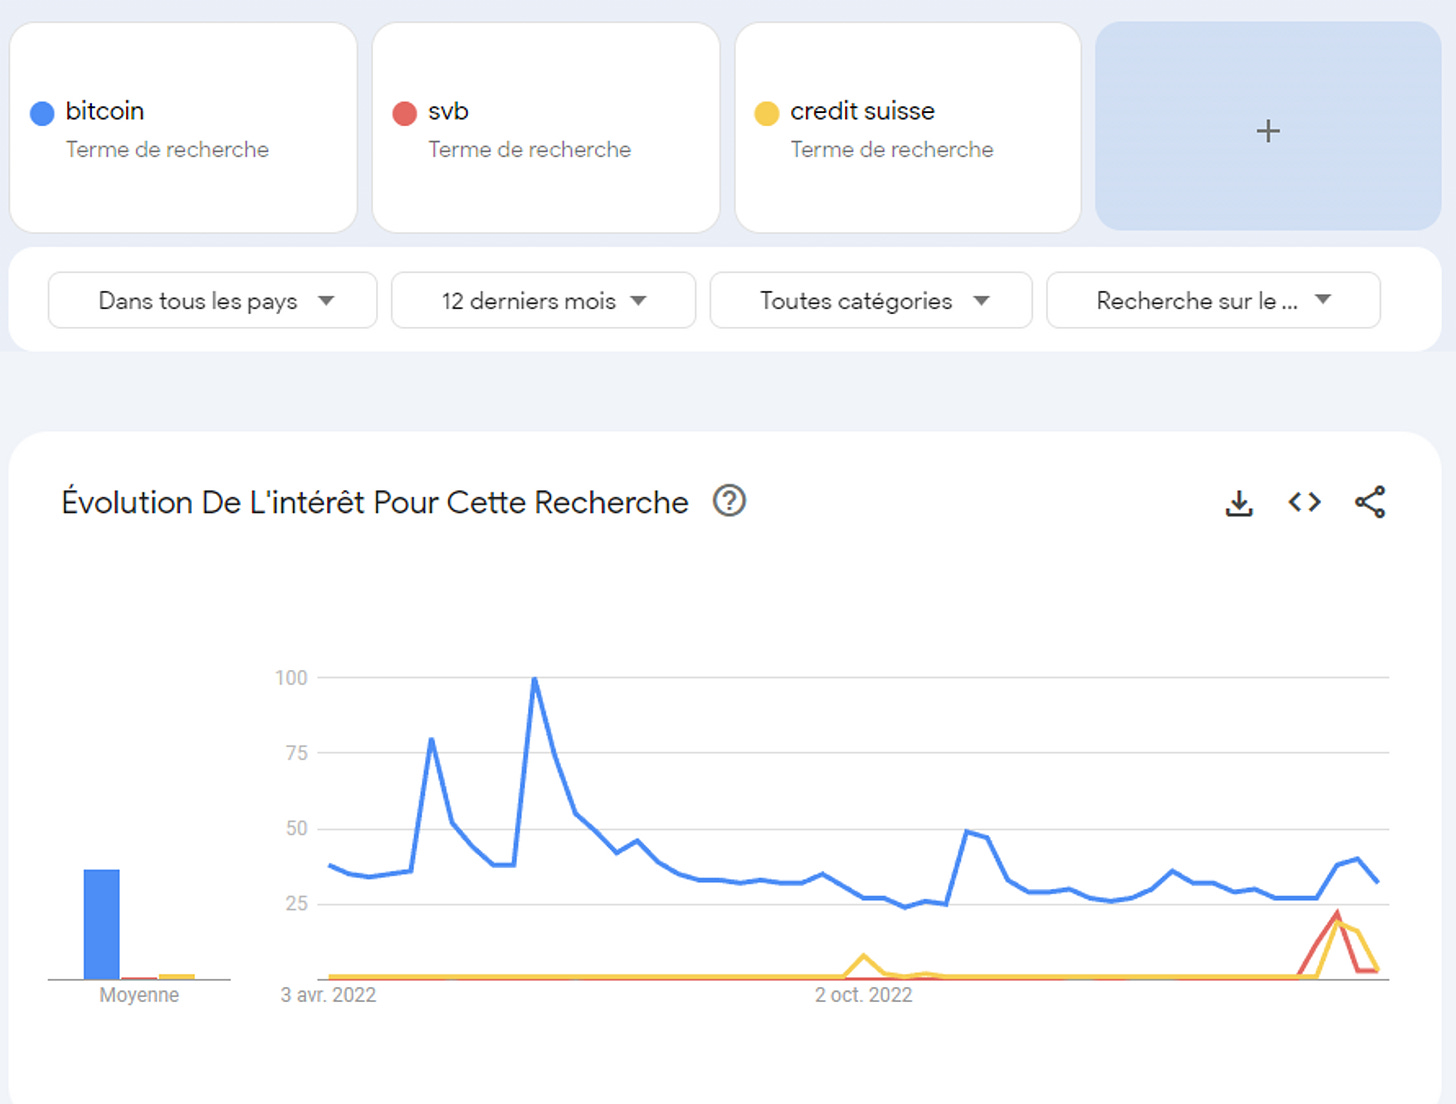 Comparison of searches for Bitcoin, Credit Suisse, and SVB on Google Trends